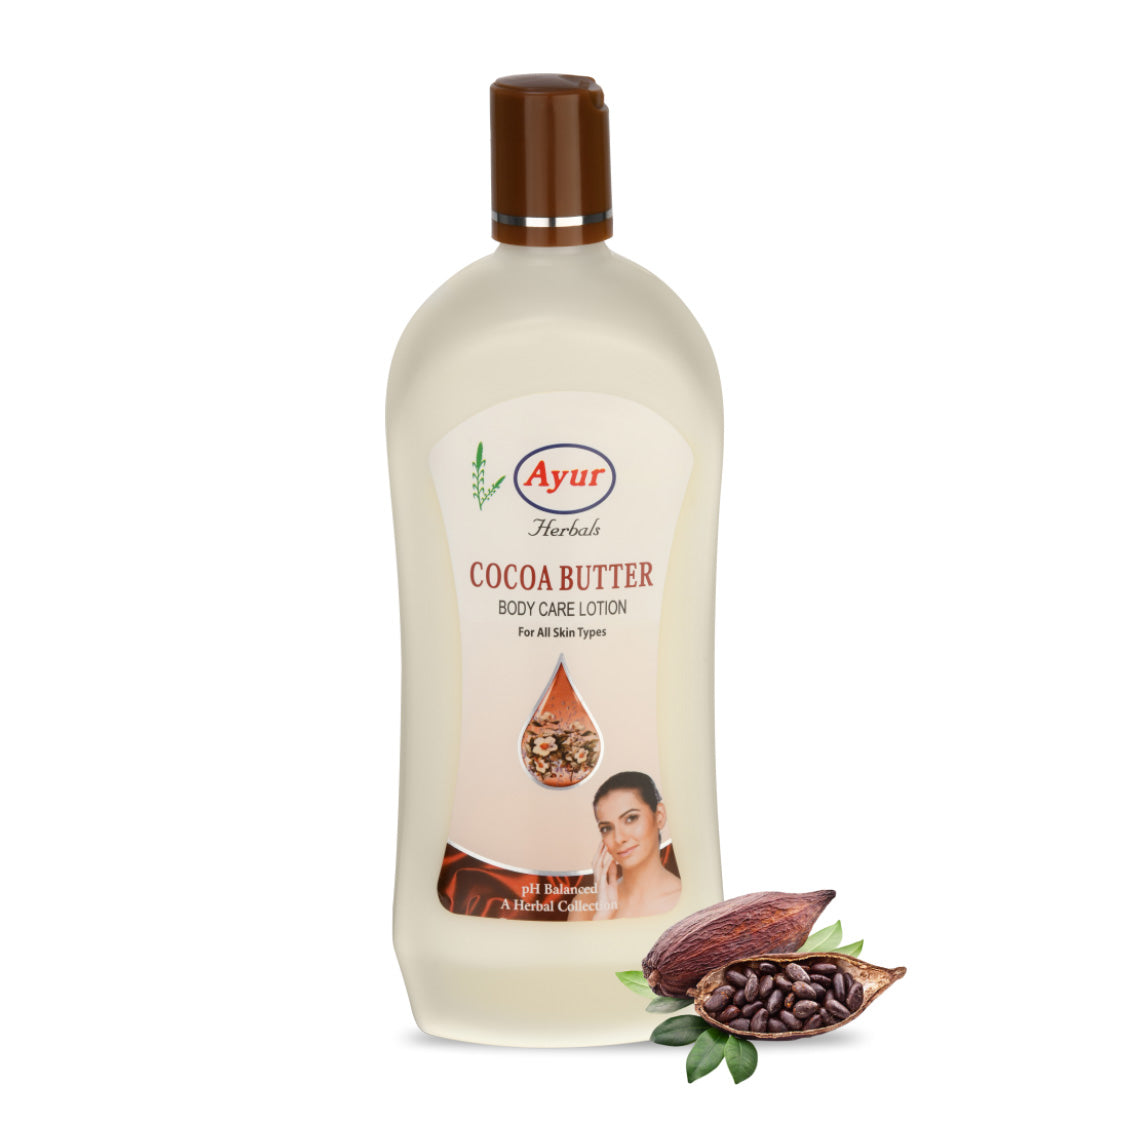 Cocoa Butter Body Care Lotion